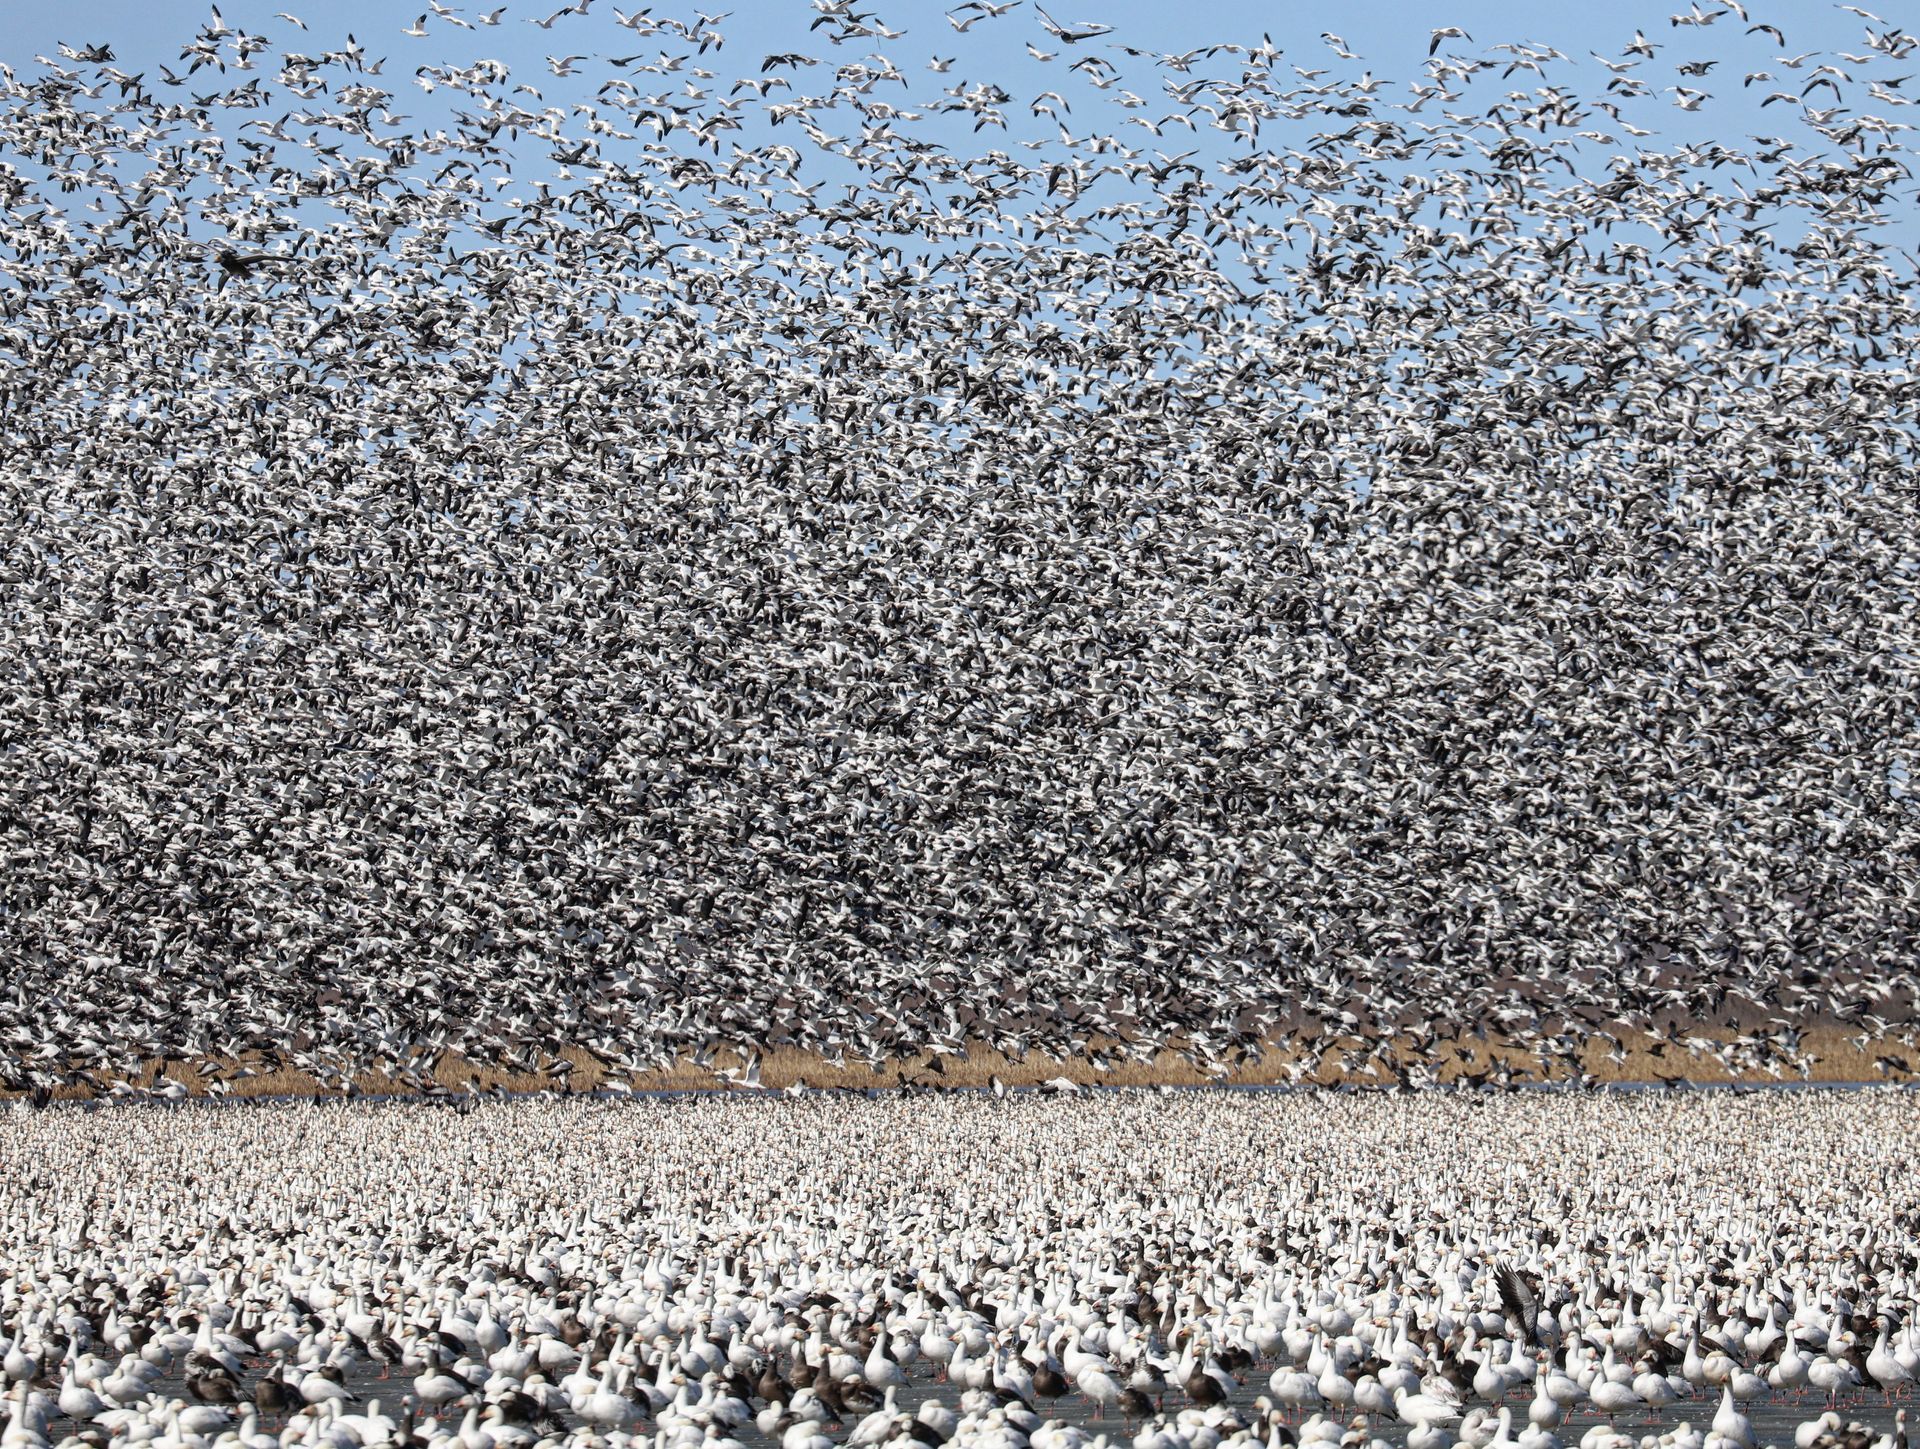 hunting snow geese